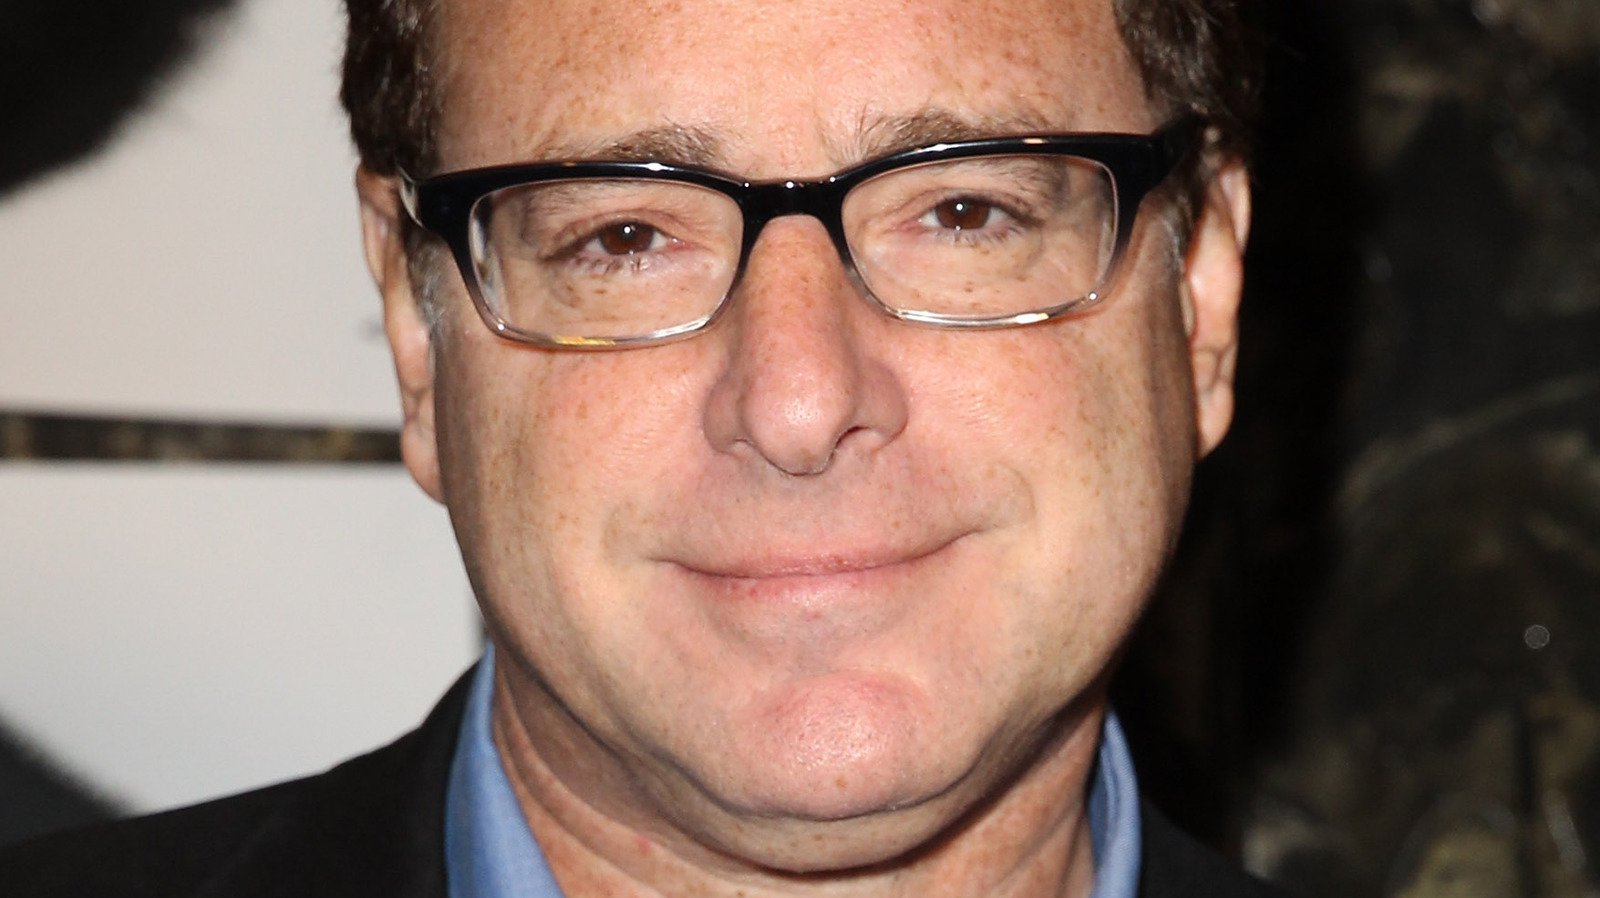 The Touching Story Behind Bob Saget’s Proposal To Kelly Rizzo